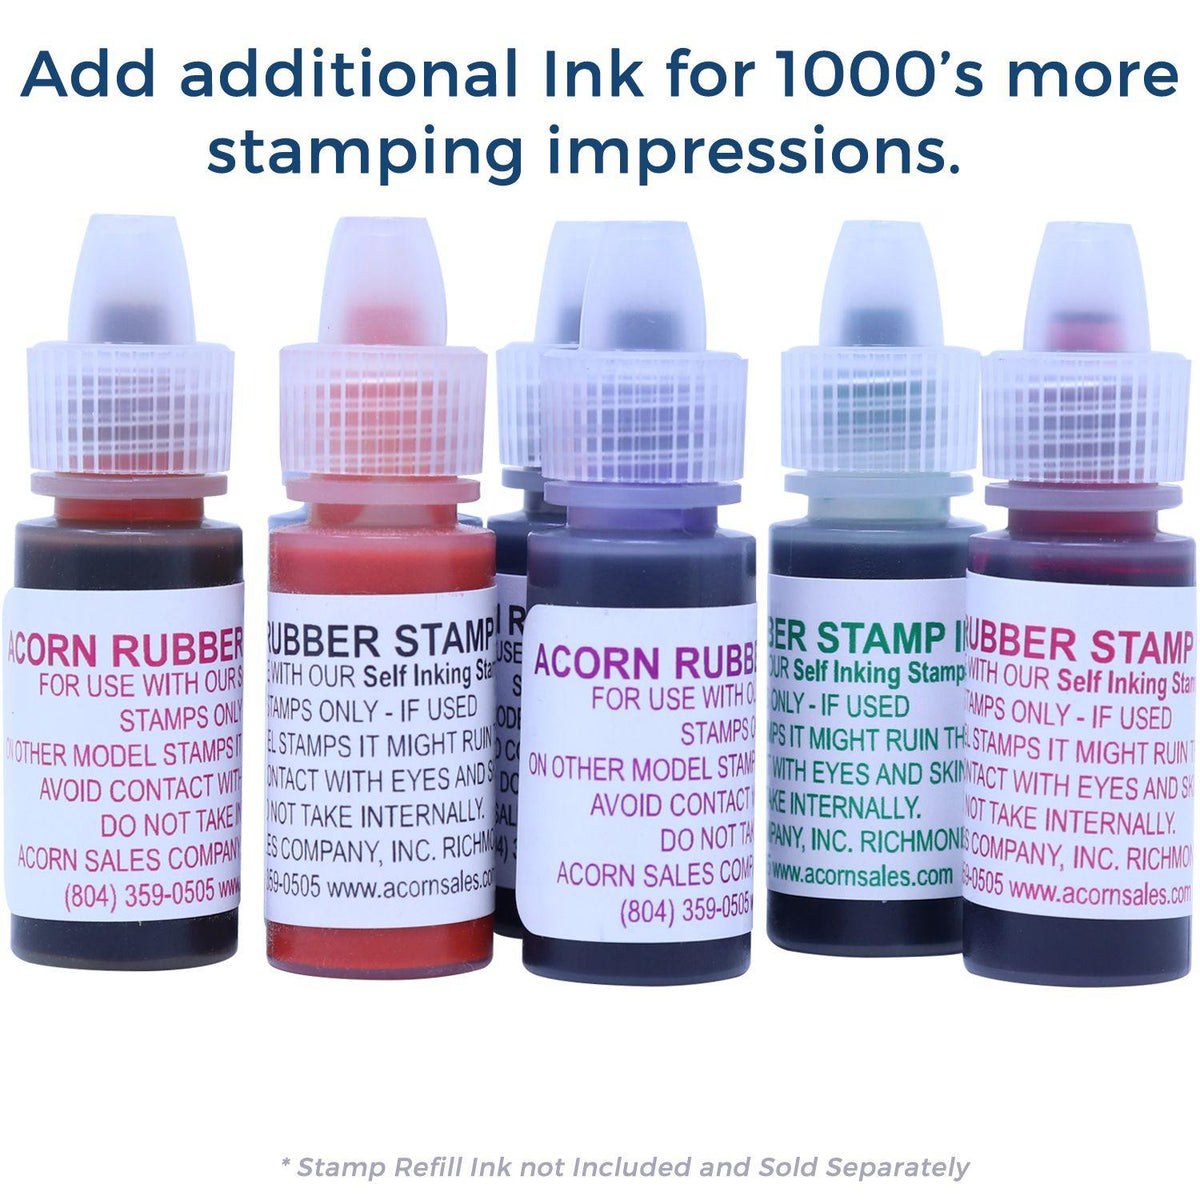 Refill Inks for Large Pre-Inked Nice Work Stamp Available